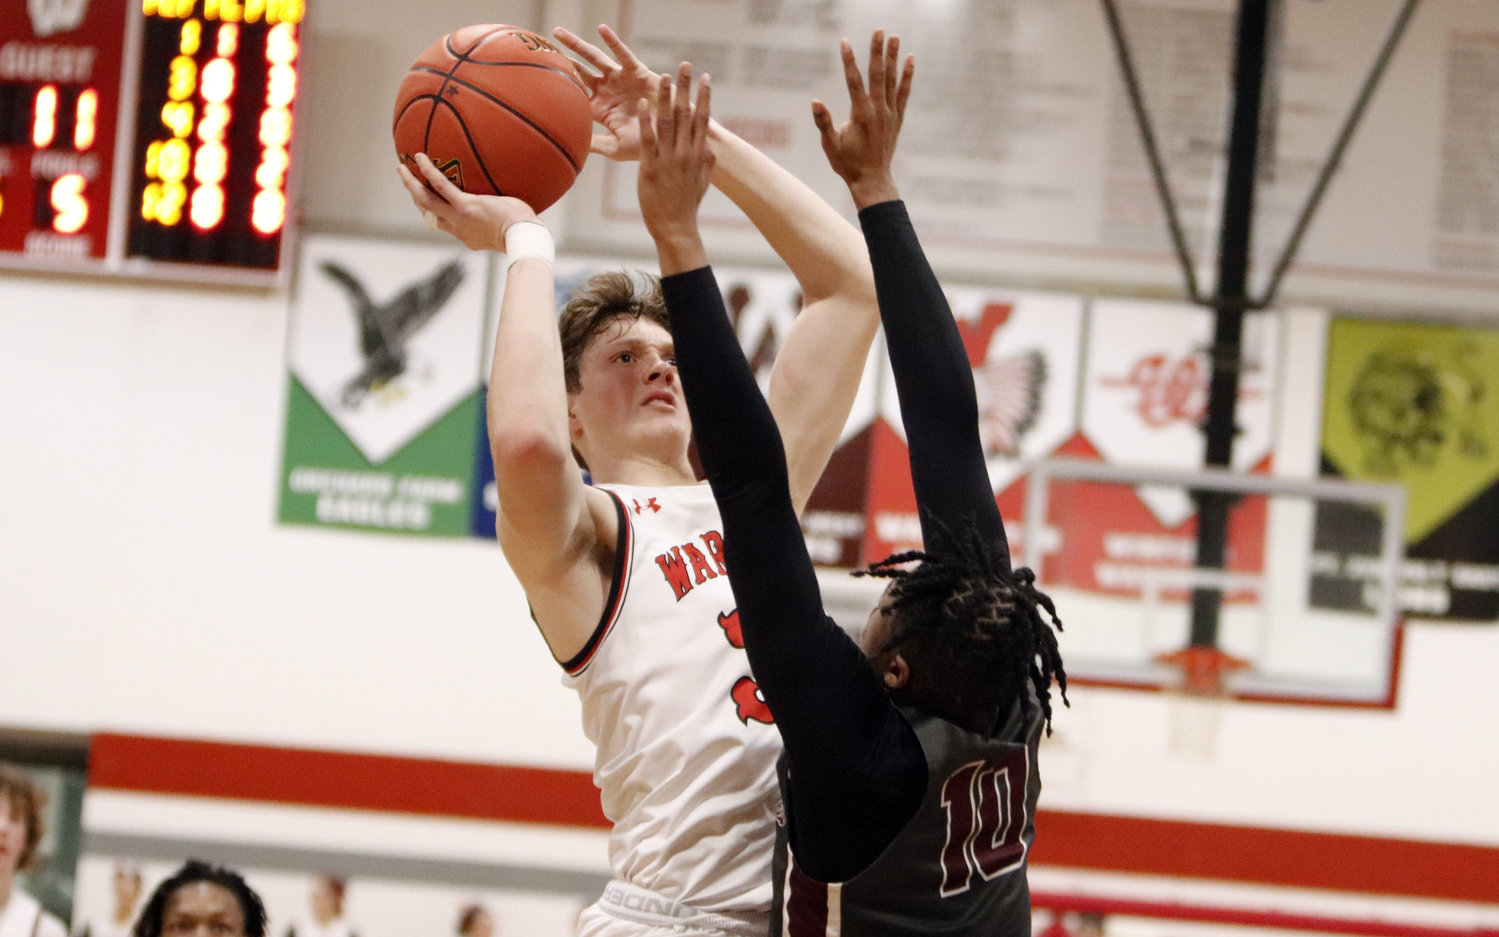 Tyler Oliver shoots over St. Charles West defender Nick Lewis during the first half of Friday night’s game. Oliver led Warrenton with 11 points.